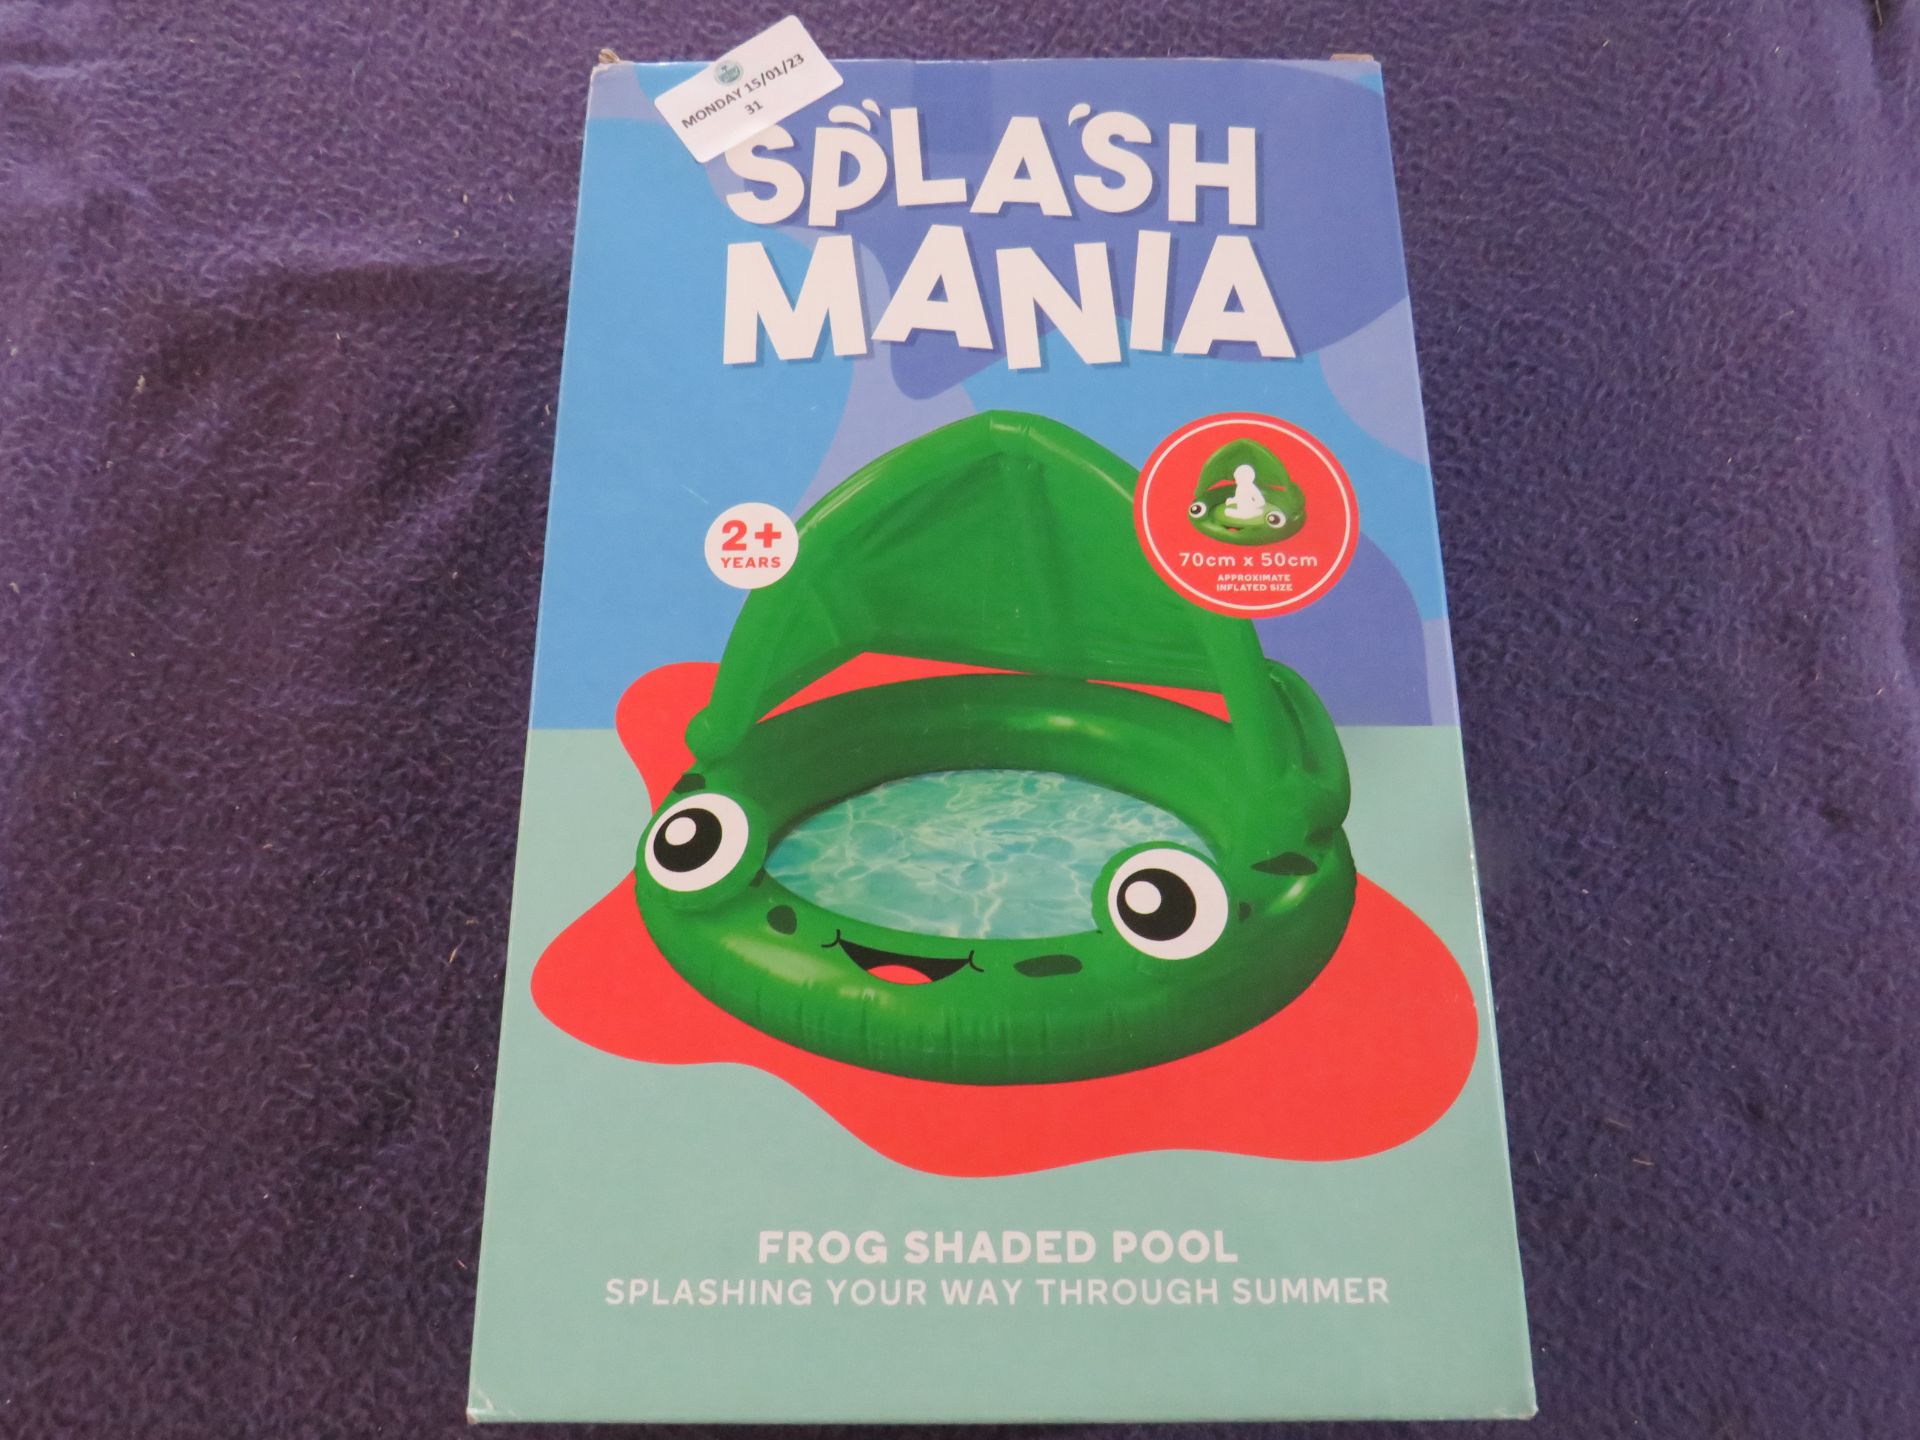 Splash Mania - Frog Shaded Pool - Unchecked & Boxed.